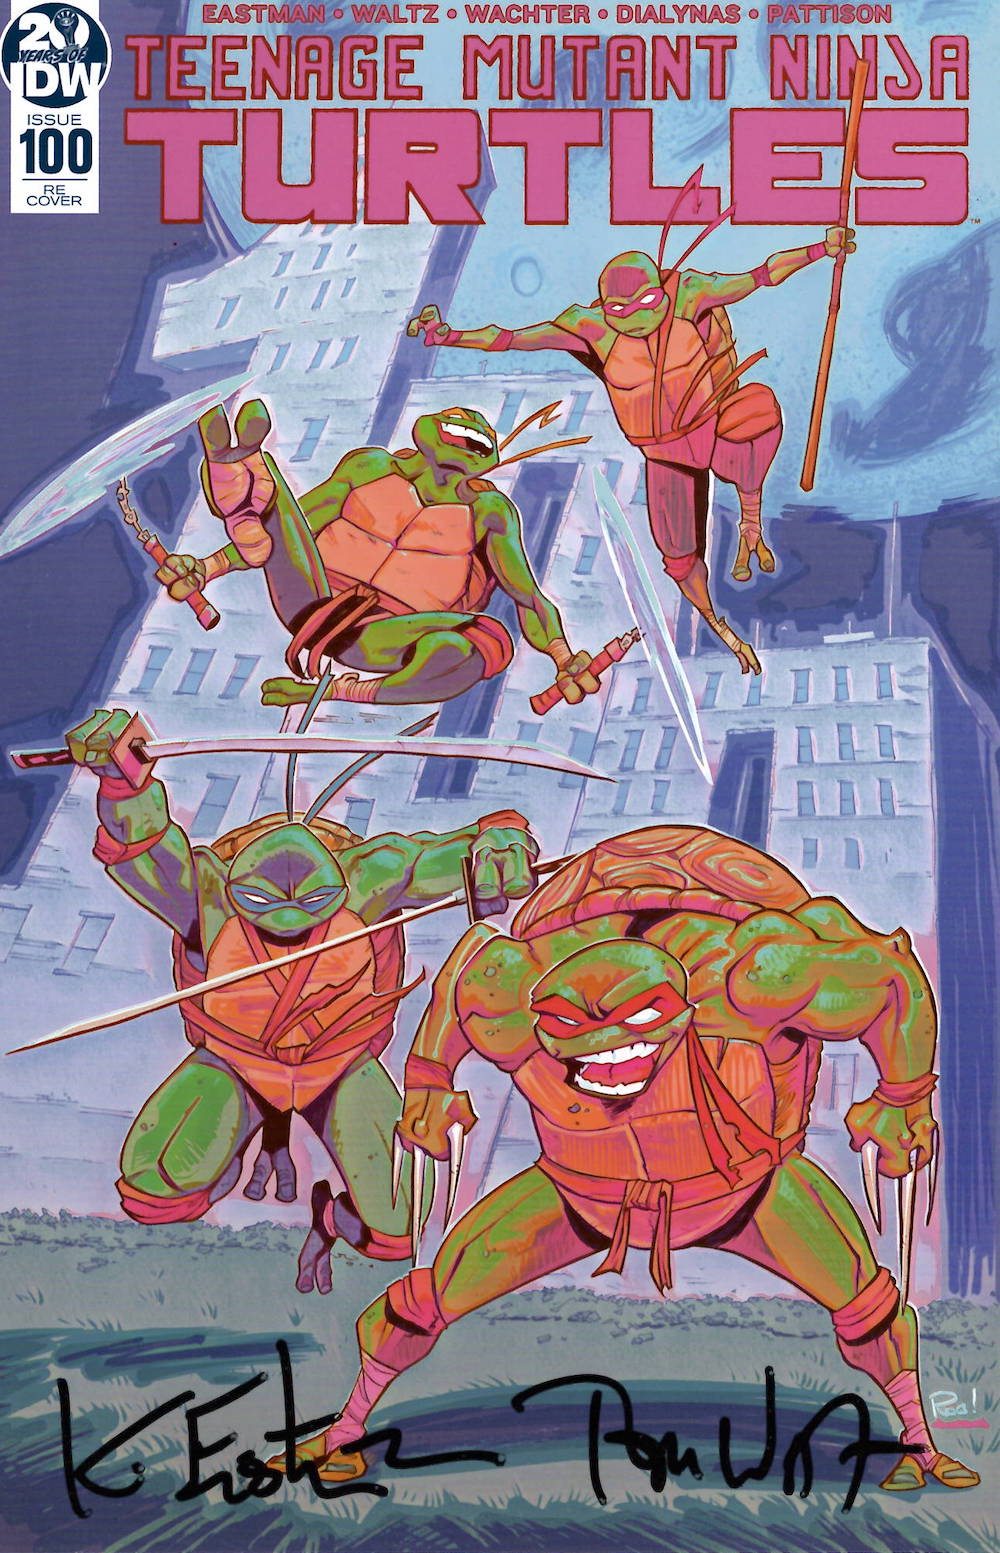 TMNT #100 Alpha Comics Variant – Signed by Eastman And Waltz